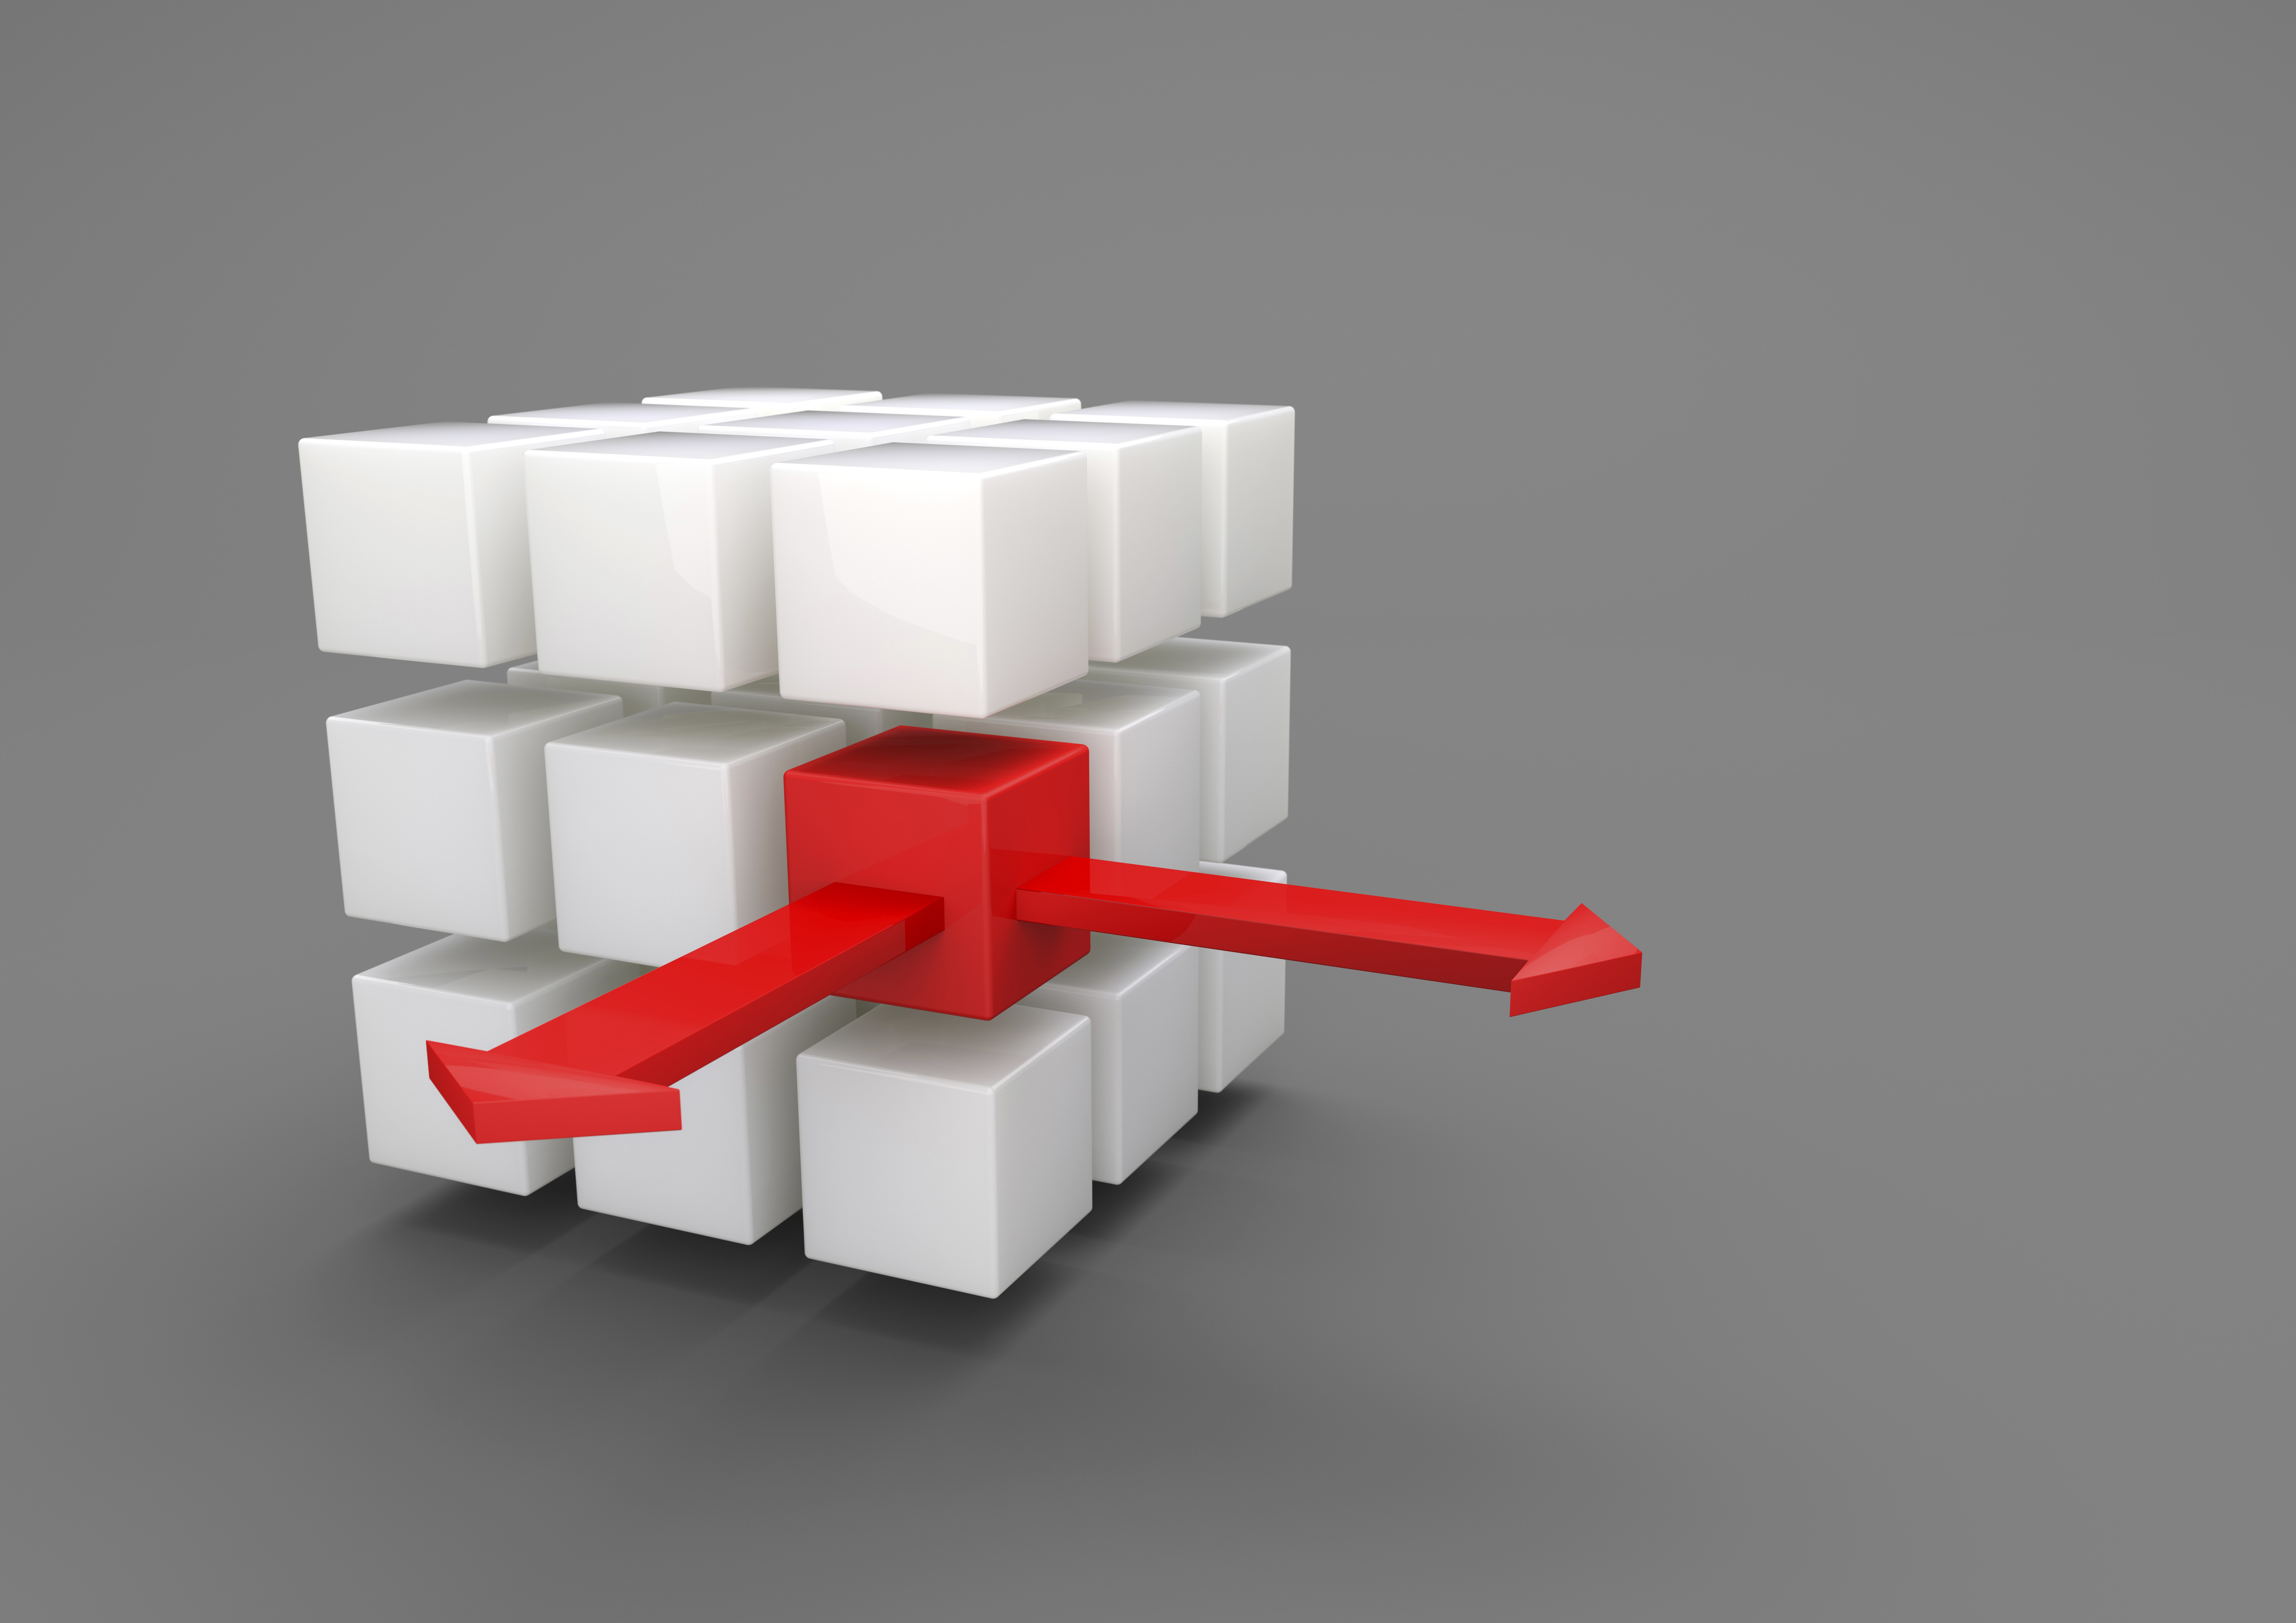 Image of a white cube with smaller red cubes being outsourced.